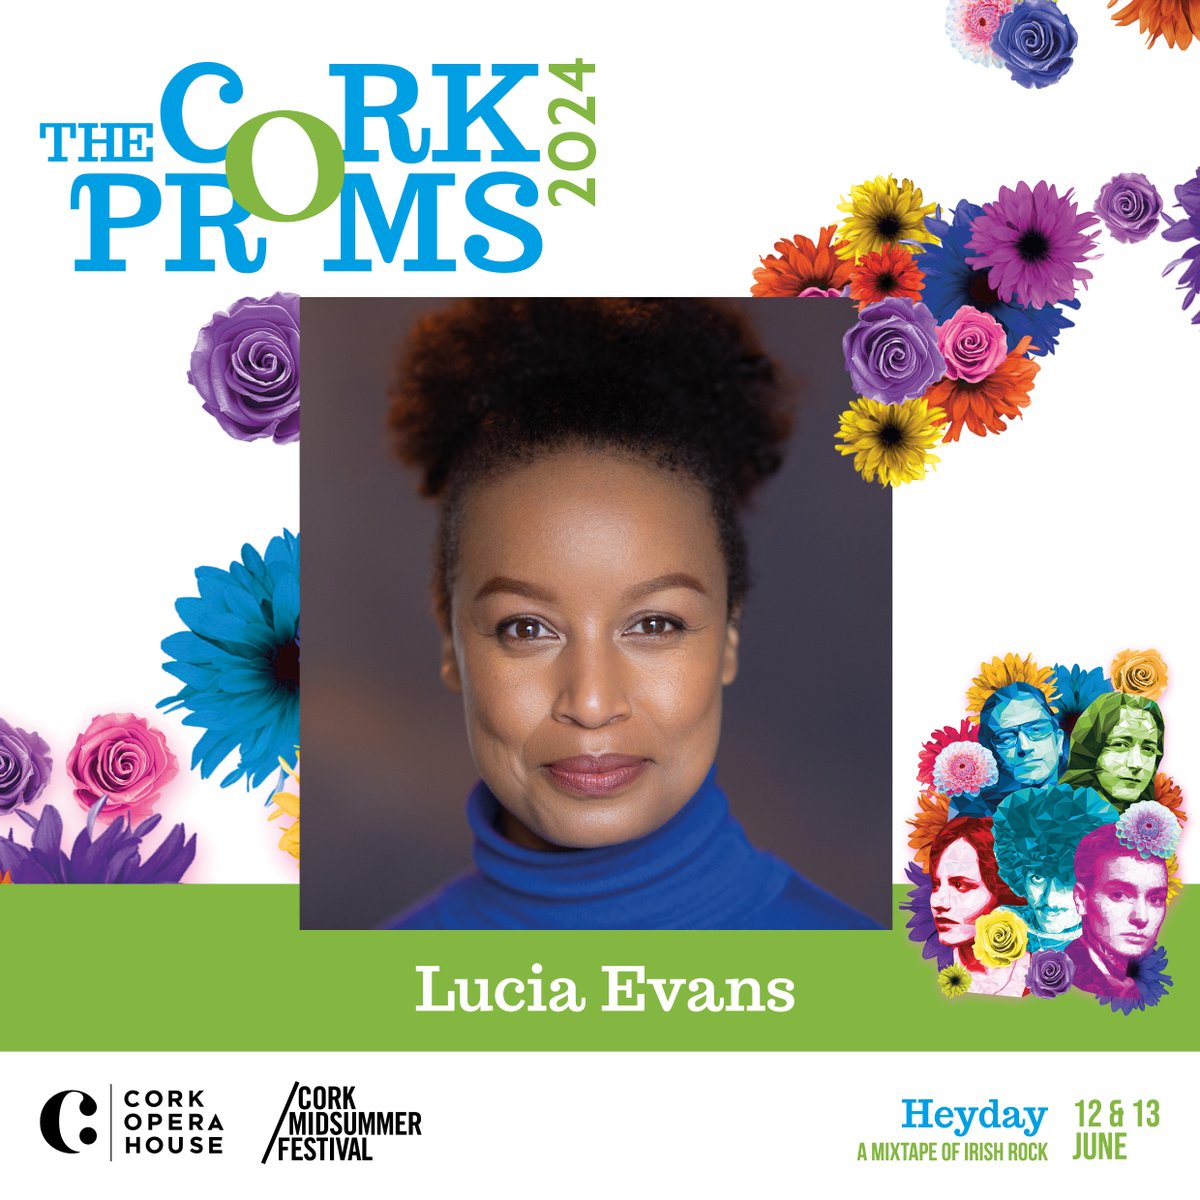 Joining us for Heyday: A Mixtape of Irish Rock & Pop, will be the wonderful Lucia Evans, collaborating with the Cork Opera House Concert Orchestra, alongside Jack O'Rourke, May Kay, Niall McCabe & Laoise Leahy, as part of Cork Proms 2024: tinyurl.com/2yhwt4f5